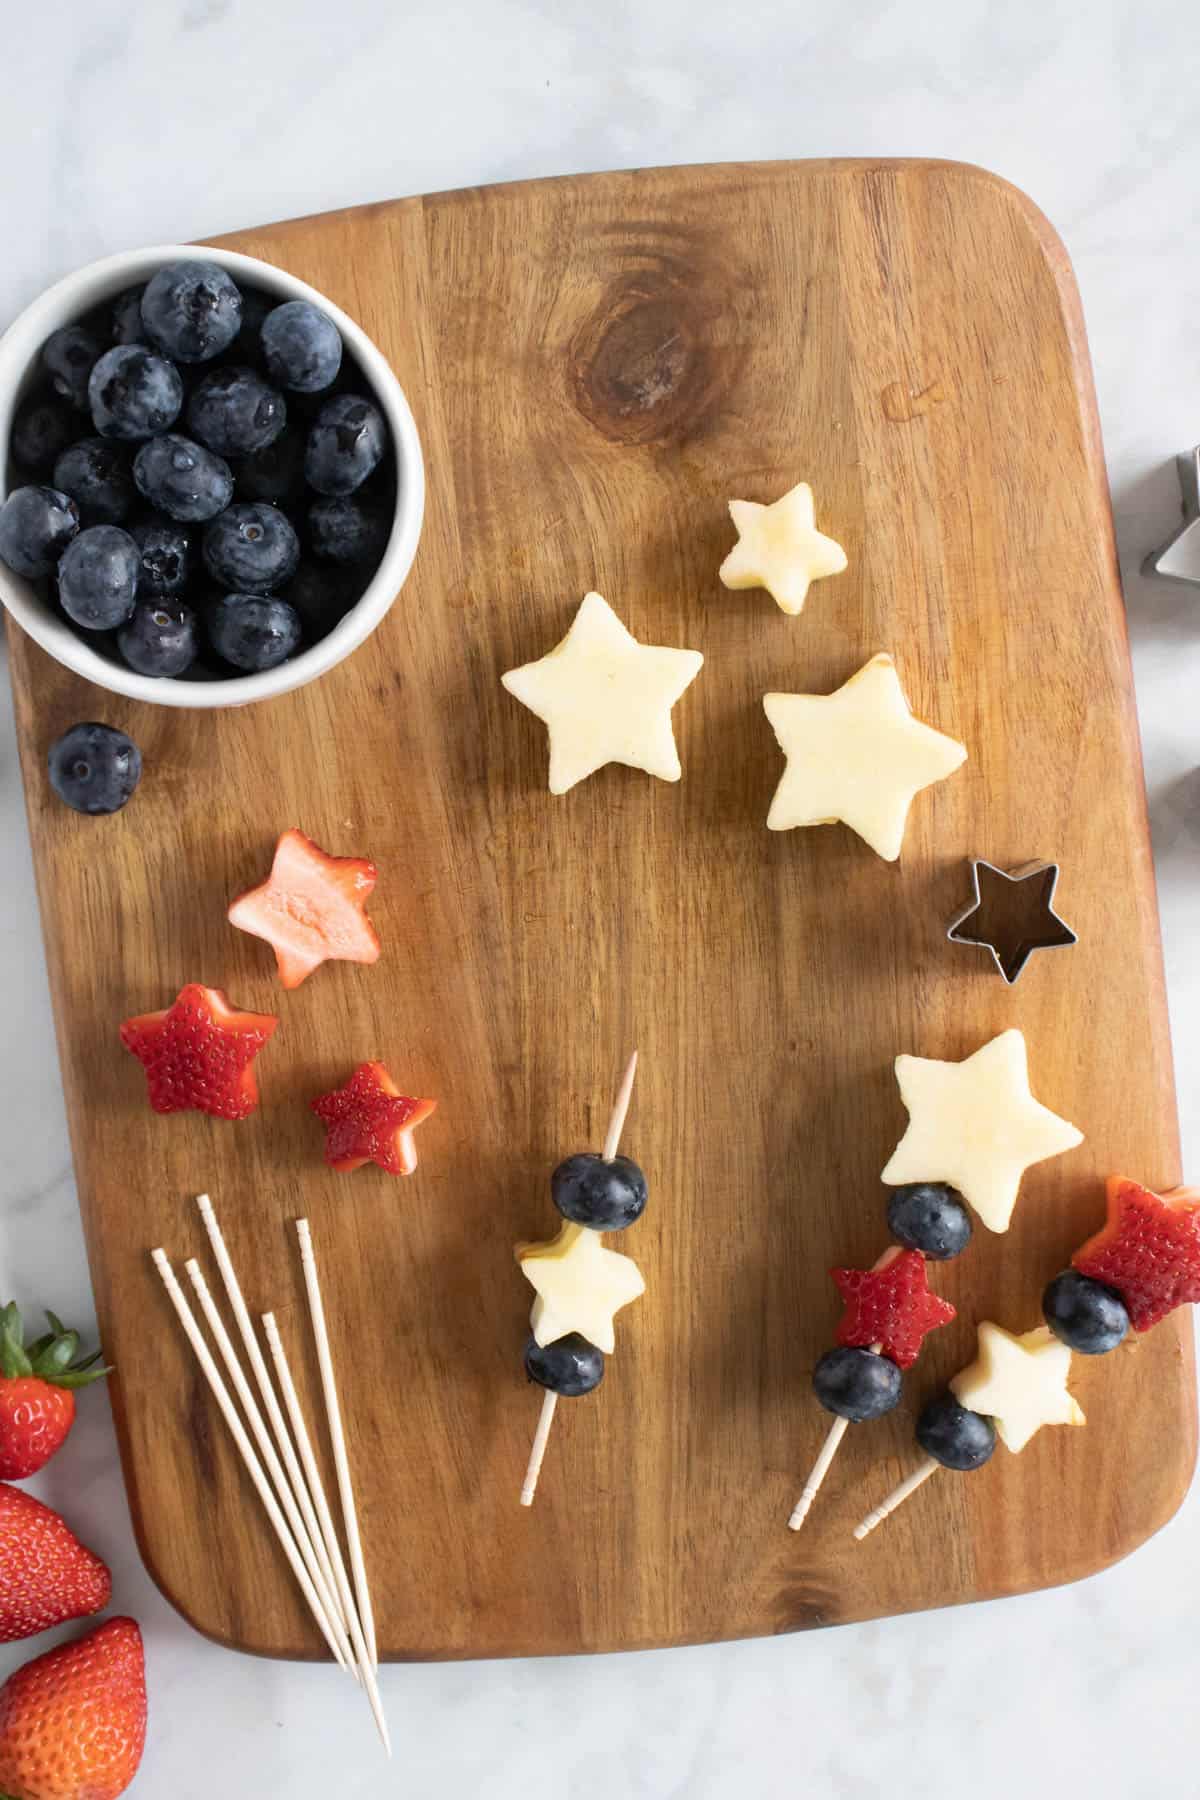 An image showing how to assembly 4th of July fruit kabobs on a wooden cutting board with apple and strawberry stars and blueberries.